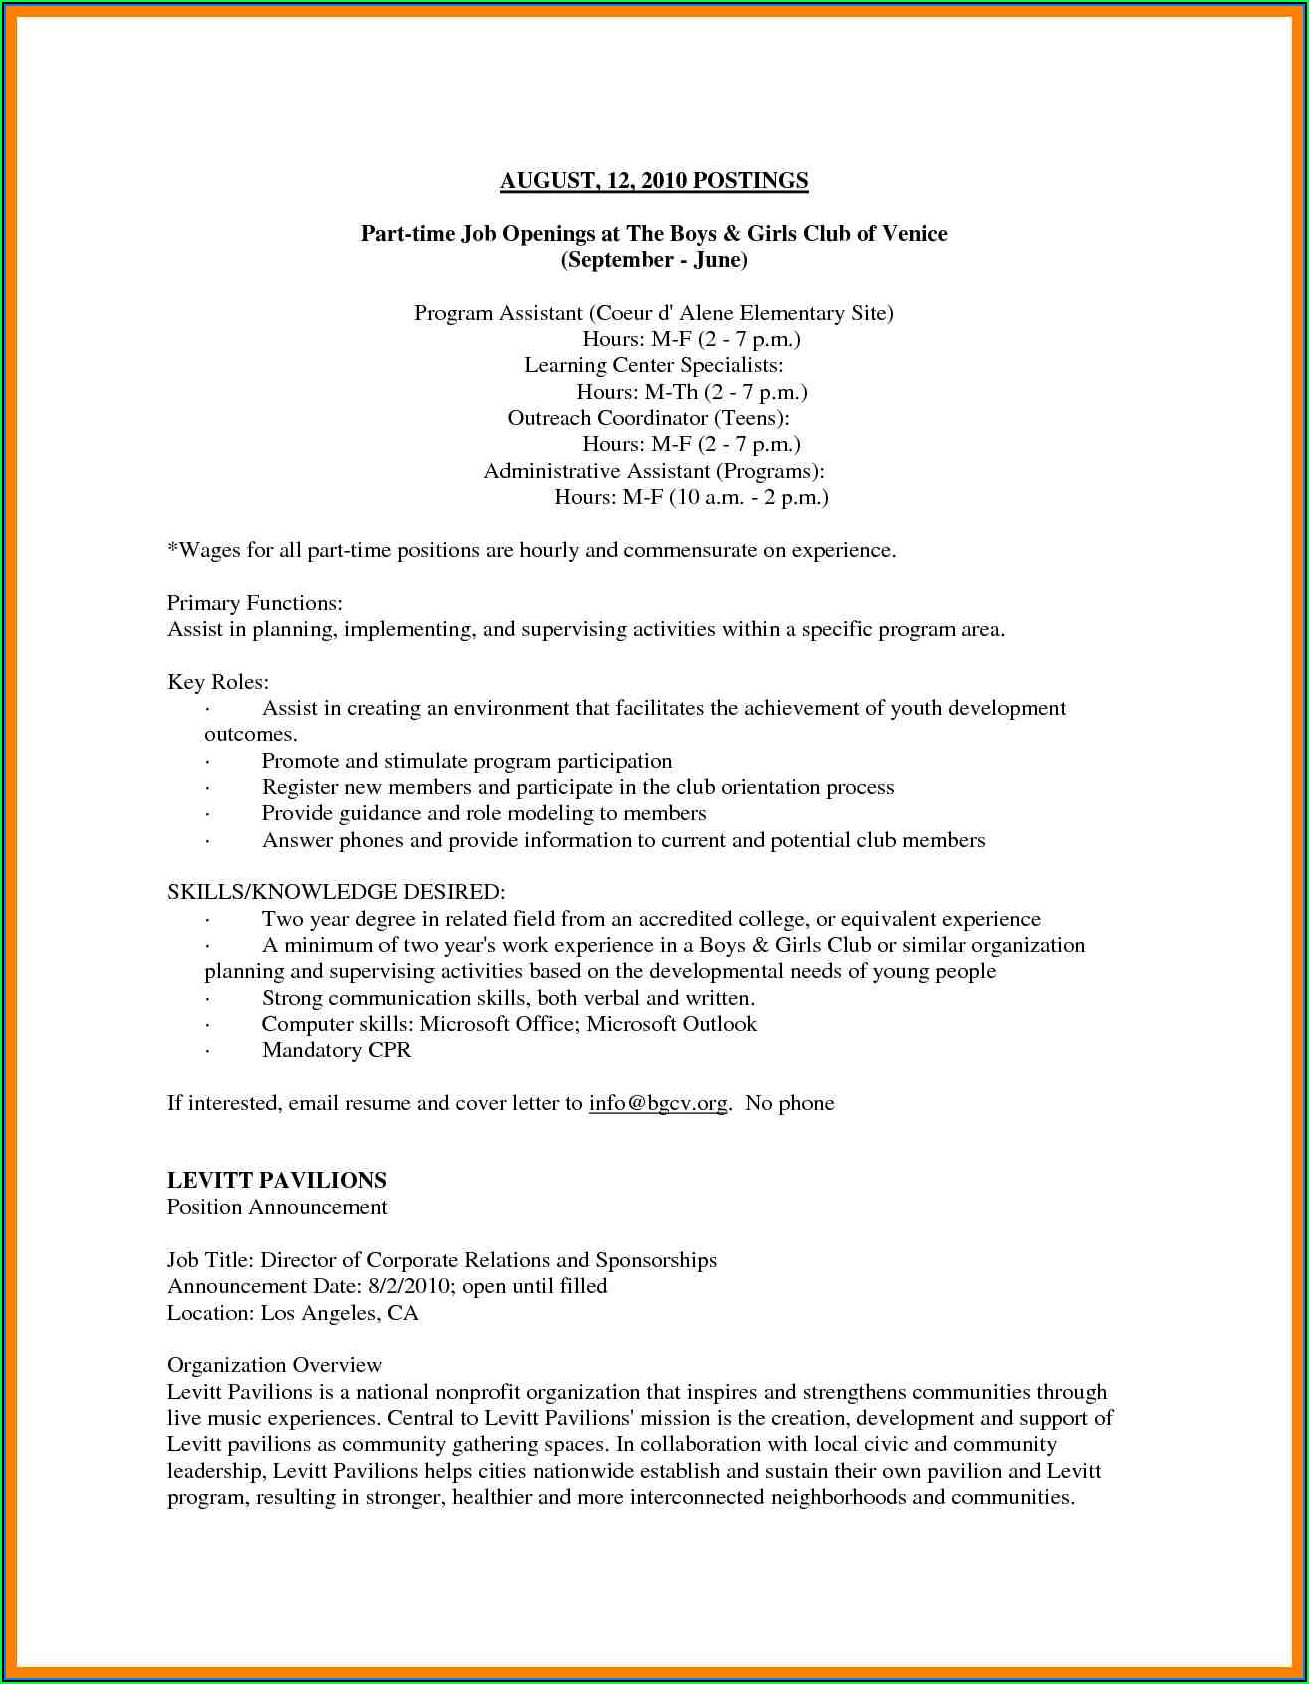 Basic Resume Examples For Retail Jobs